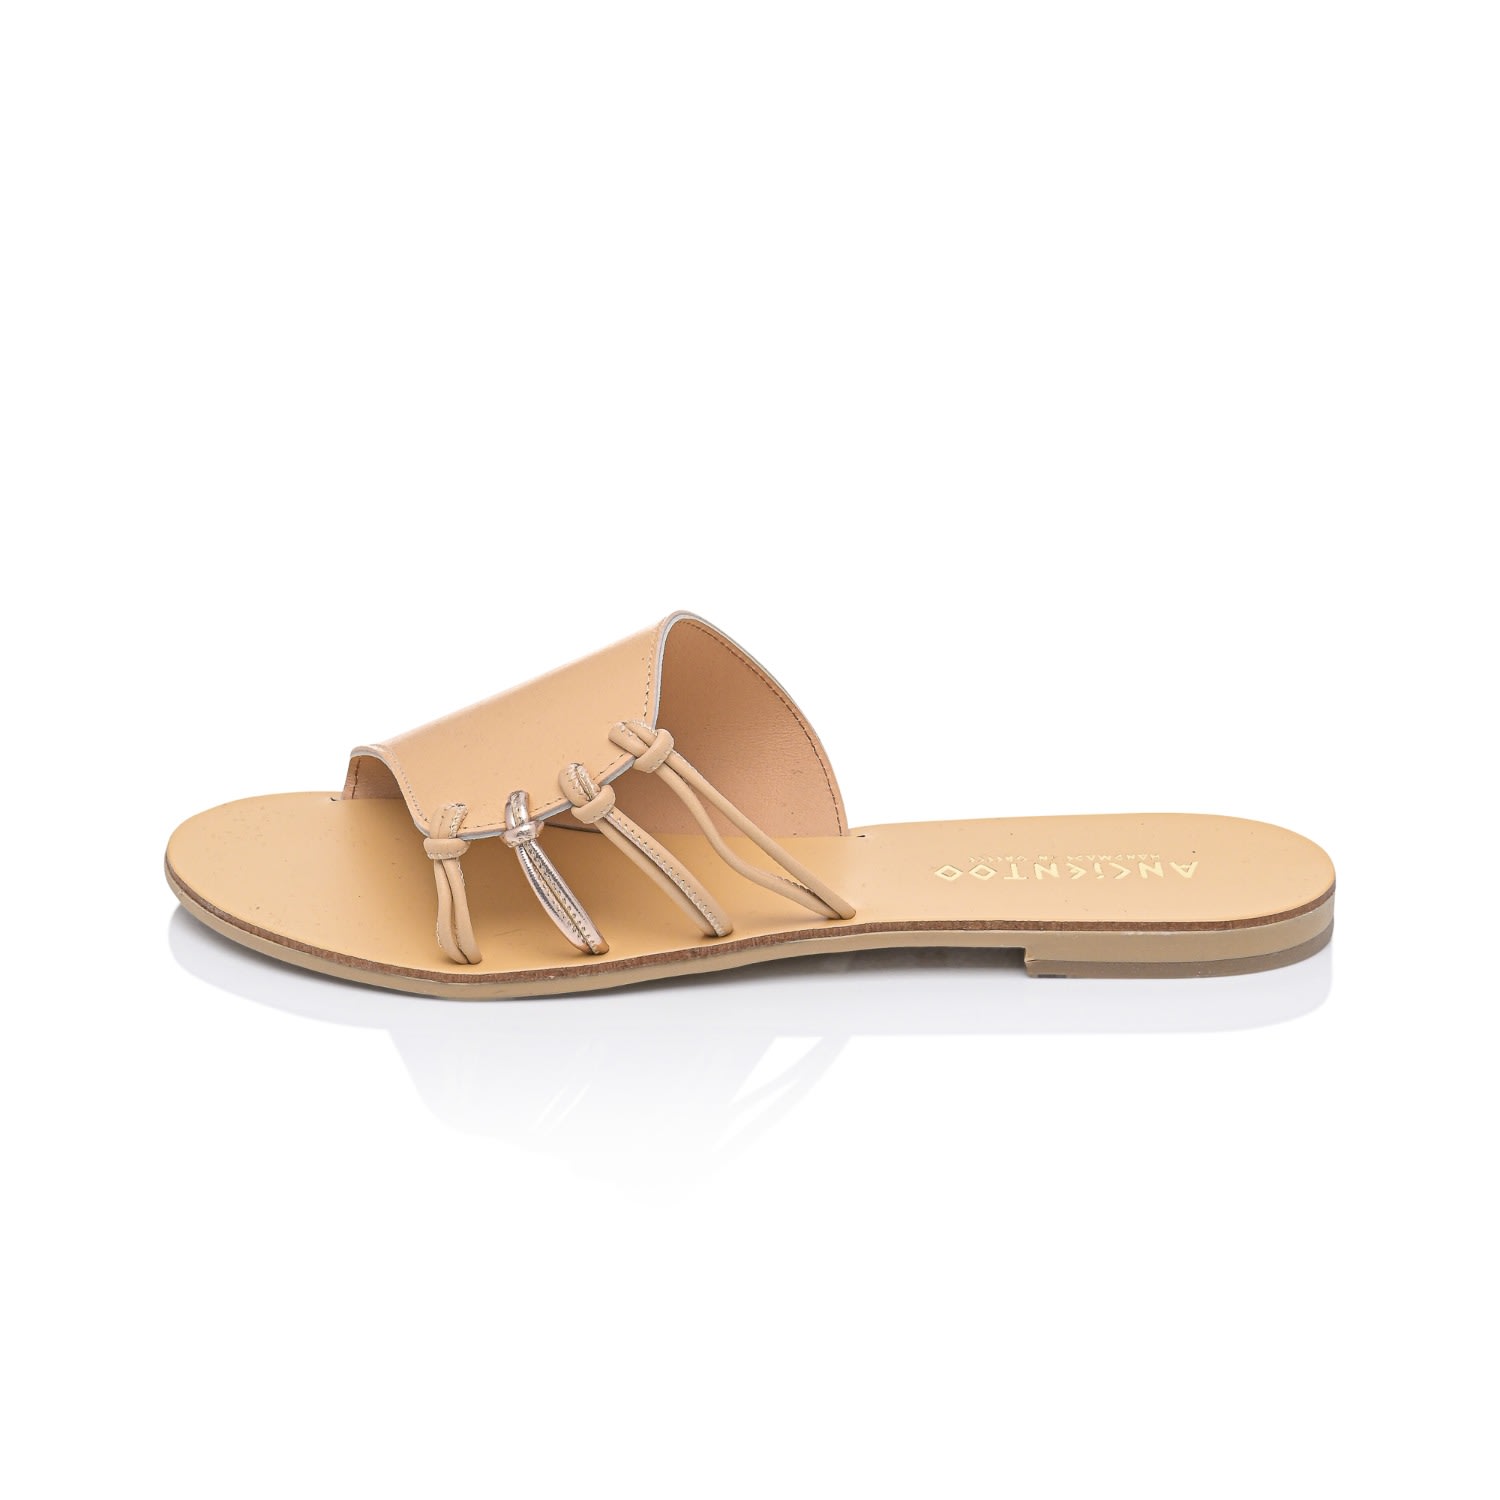 Ancientoo Neutrals Athena Handcrafted Women's Slide Sandals With Solid Leather Covering Tethered With Cords Tr In Black